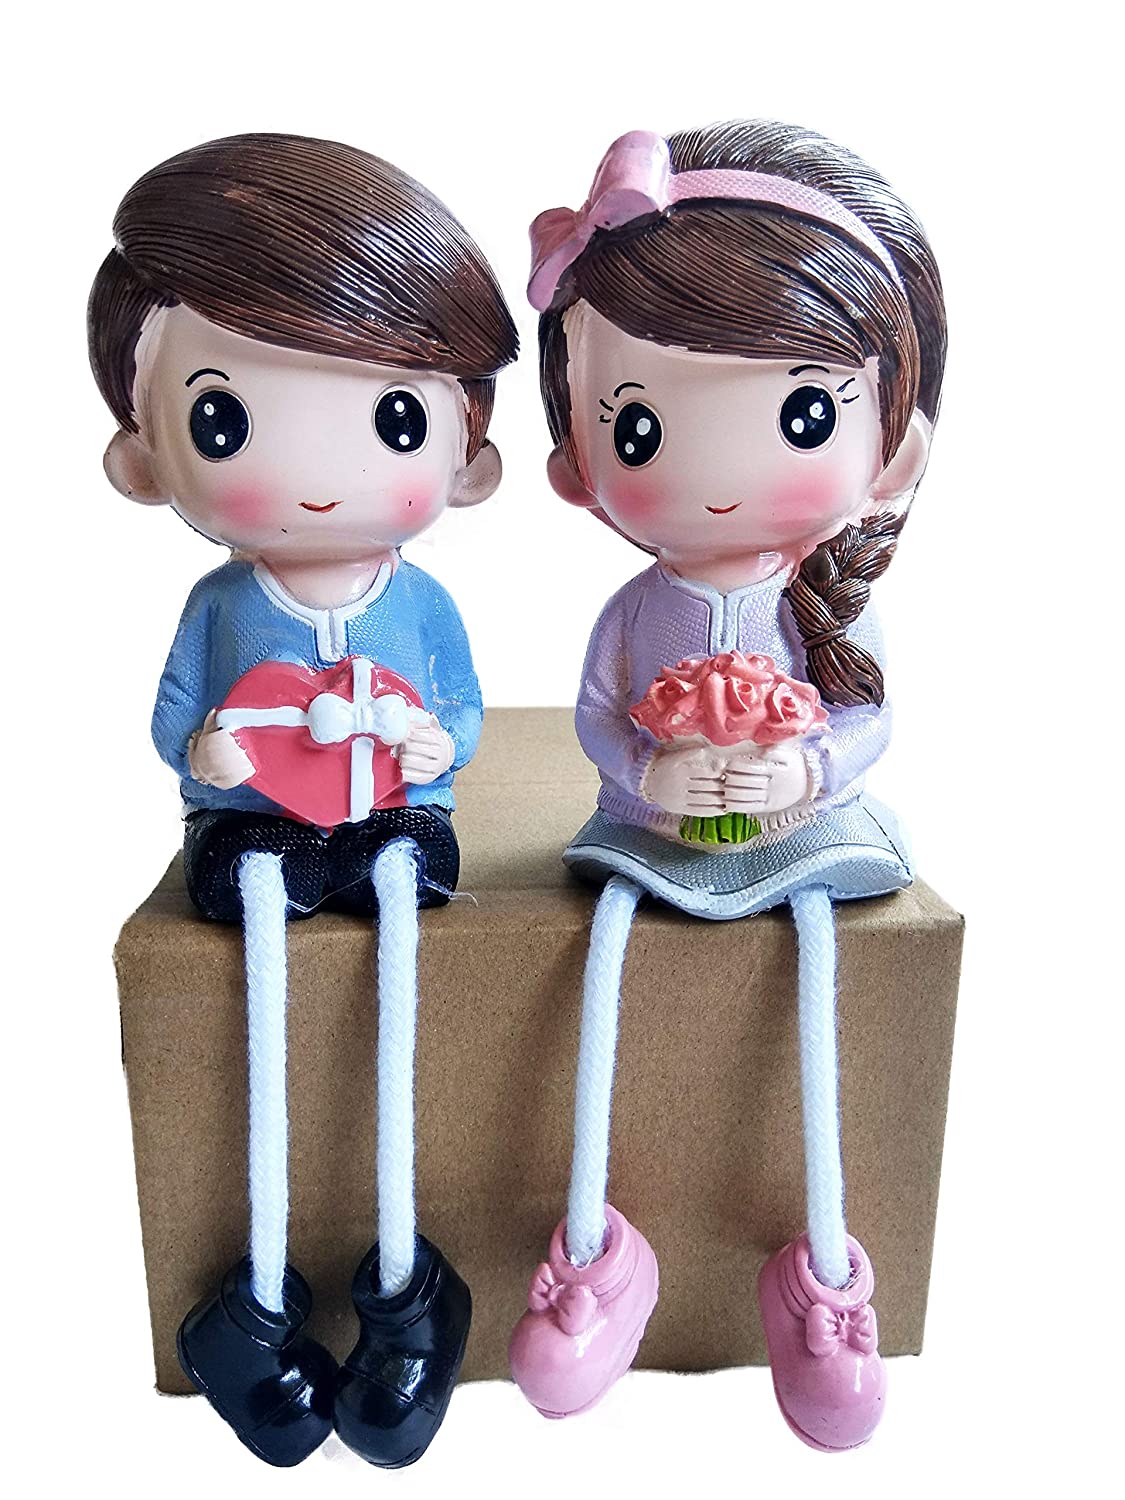 Homesutraa 5 inch Resin Love Couple Boy & Girl with Hanging Legs Showpiece  Dolls for Home